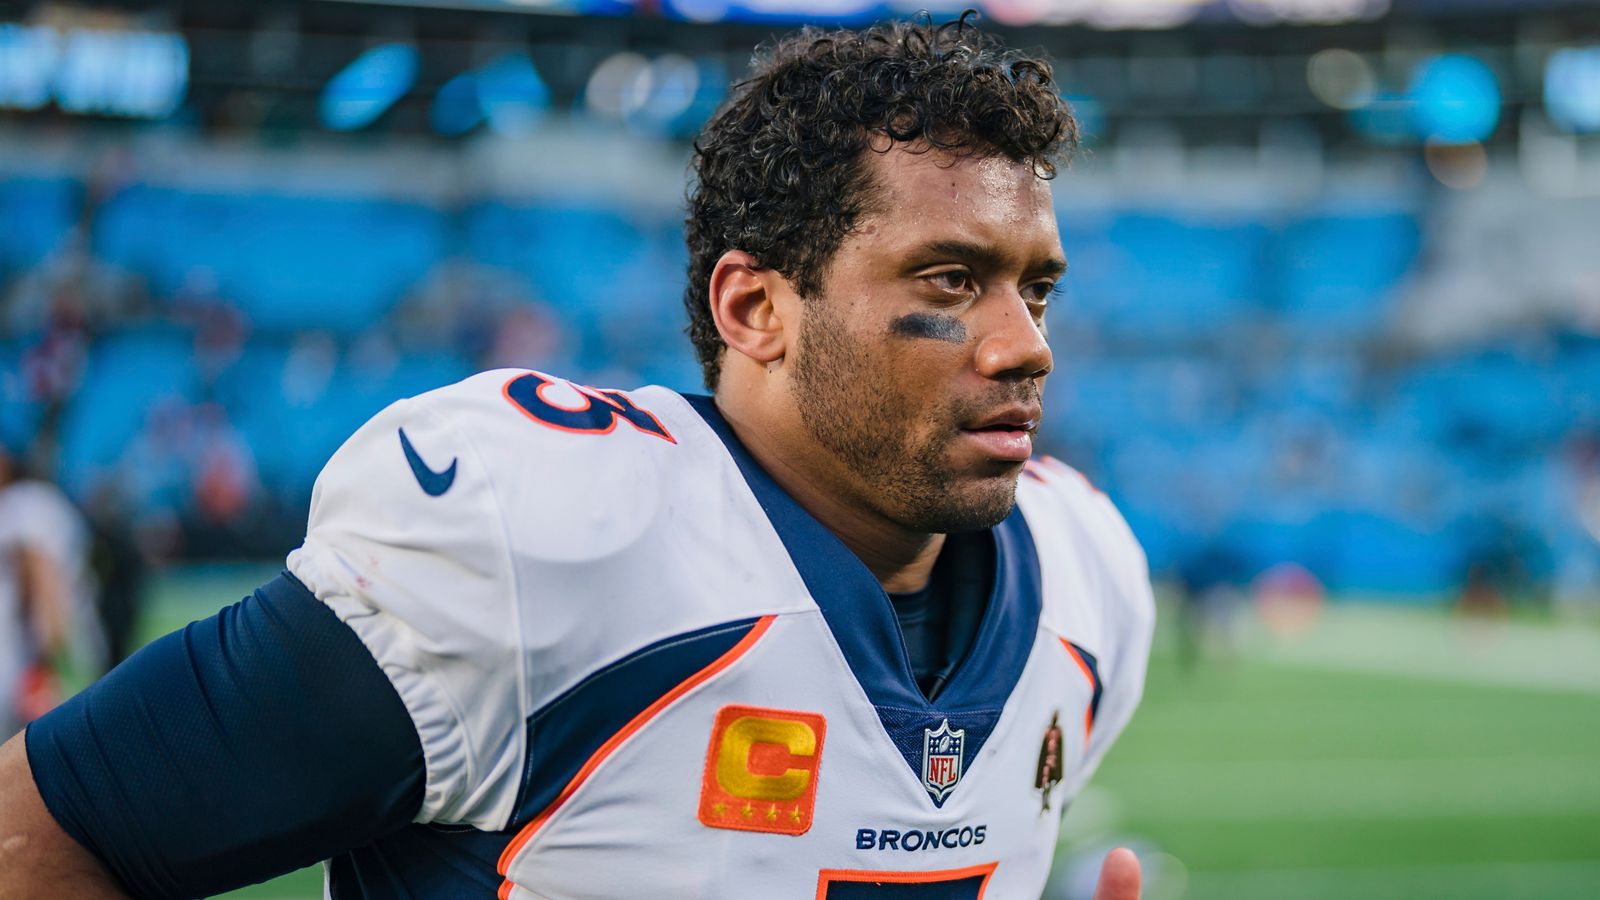  Russell Wilson's Big Move to Steelers Pat Freiermuth's Excitement Sparks New Team Hopes and Challenges---